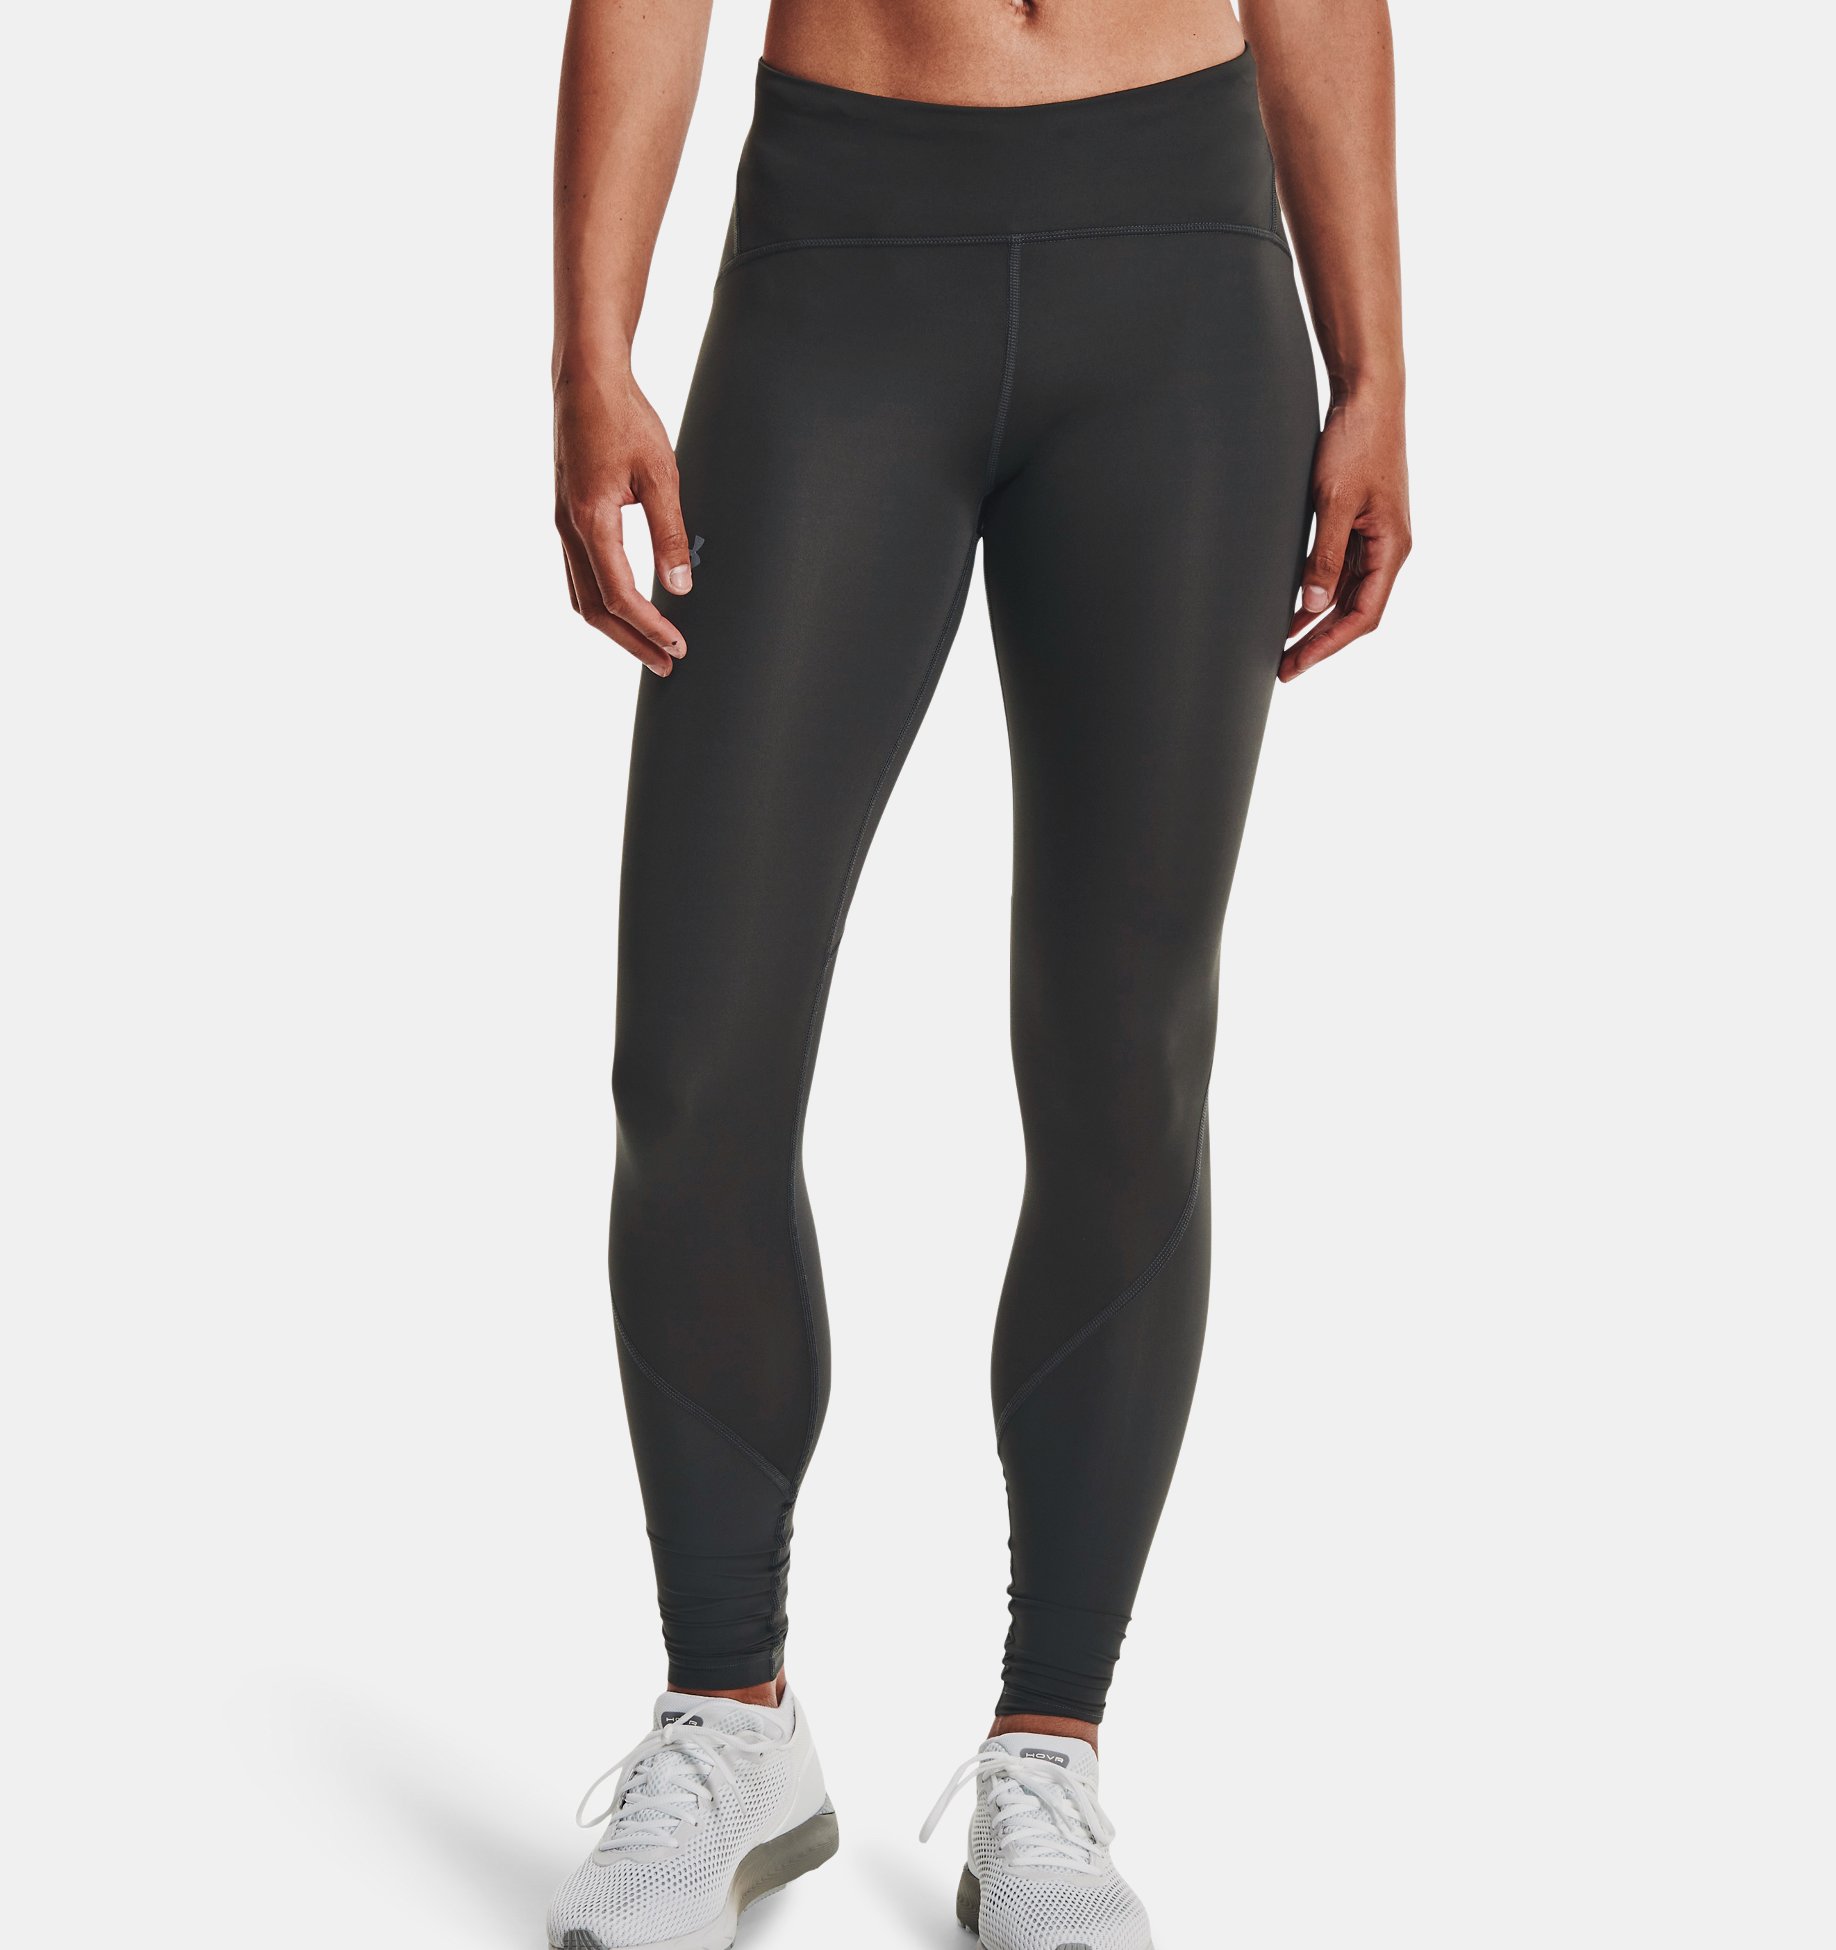 Under Armour UA Accelerate Reflective Men’s Running Leggings XXL for sale online 